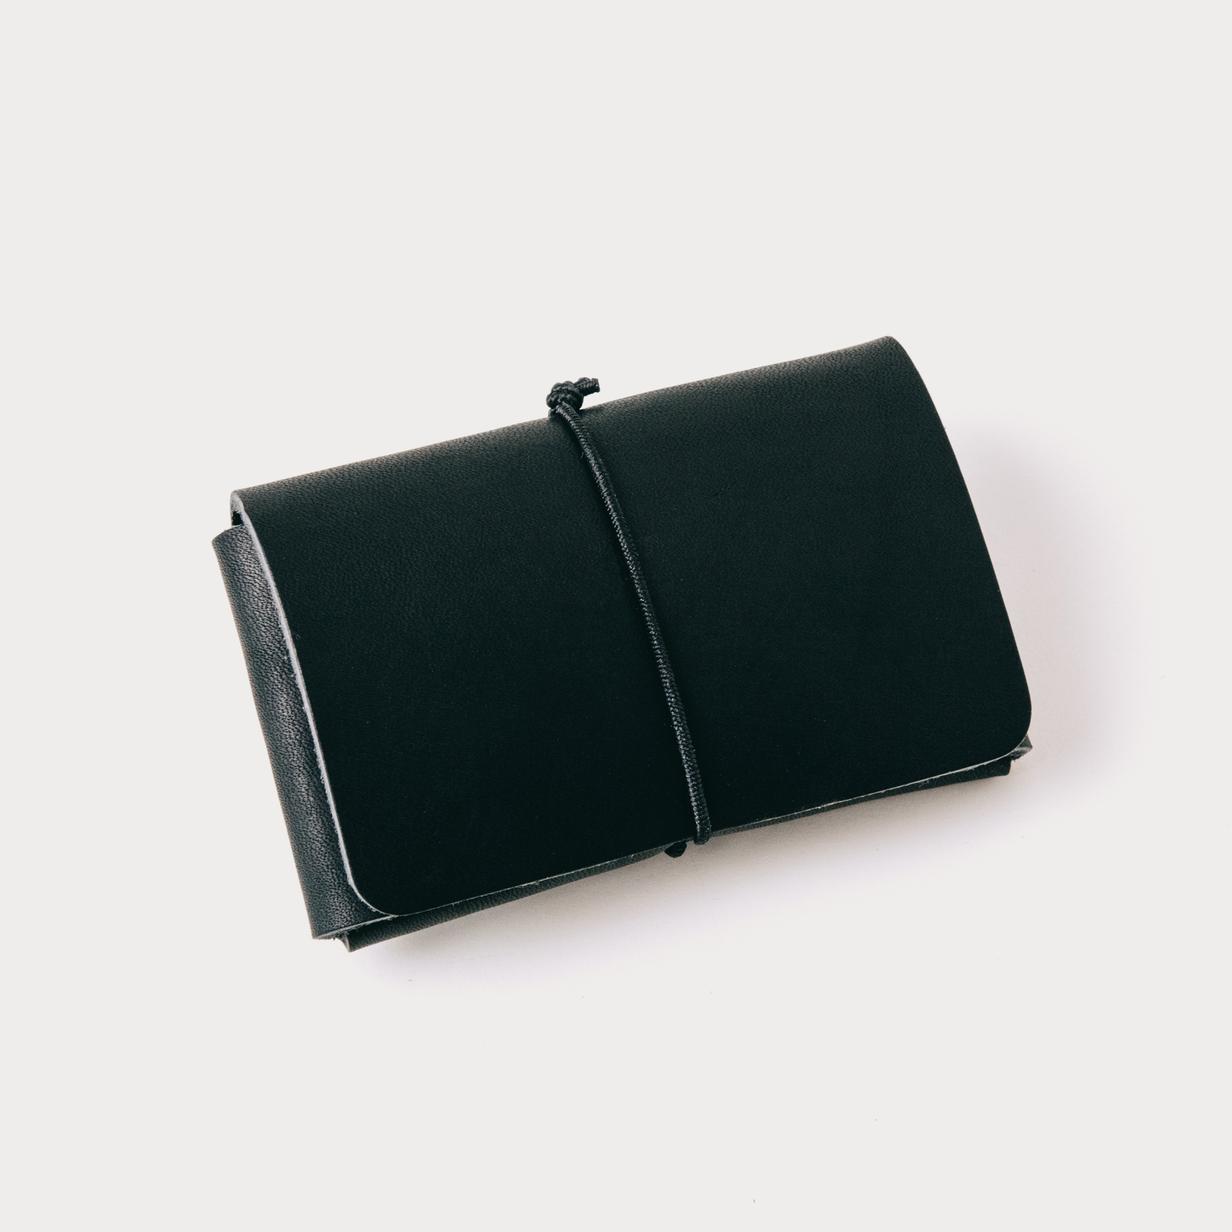 Moment Clever Supply Minimalist Wallet Black 01